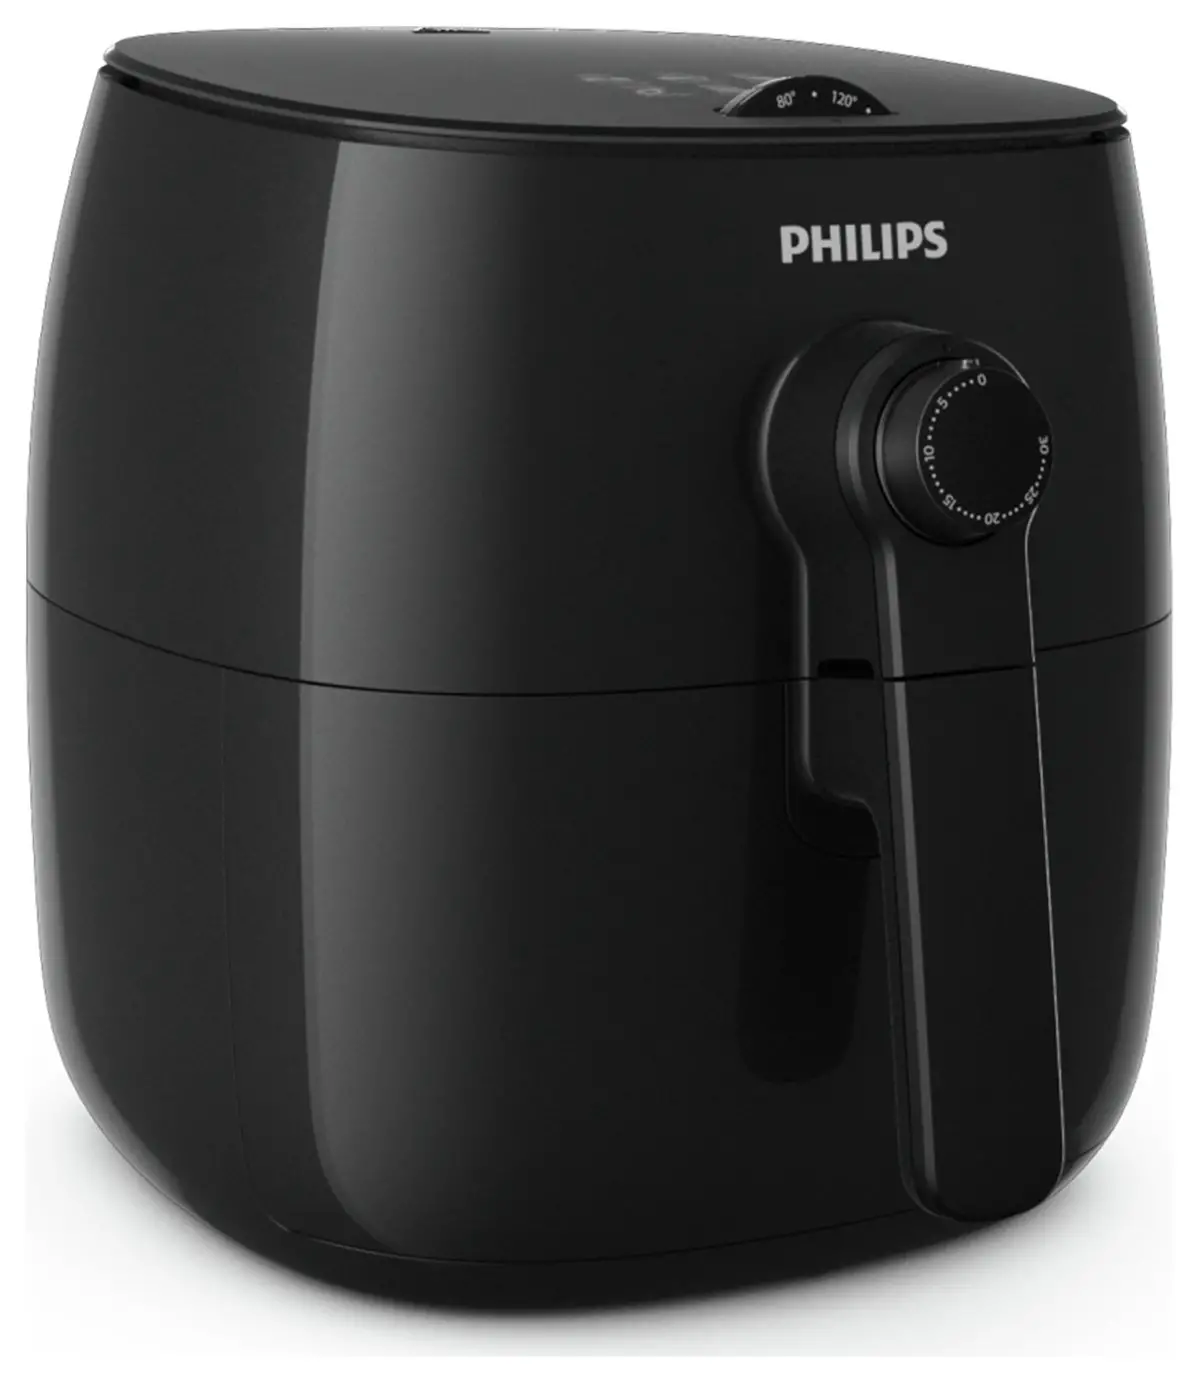 Philips Viva Collection Air Fryer HD9621/91 Reviews